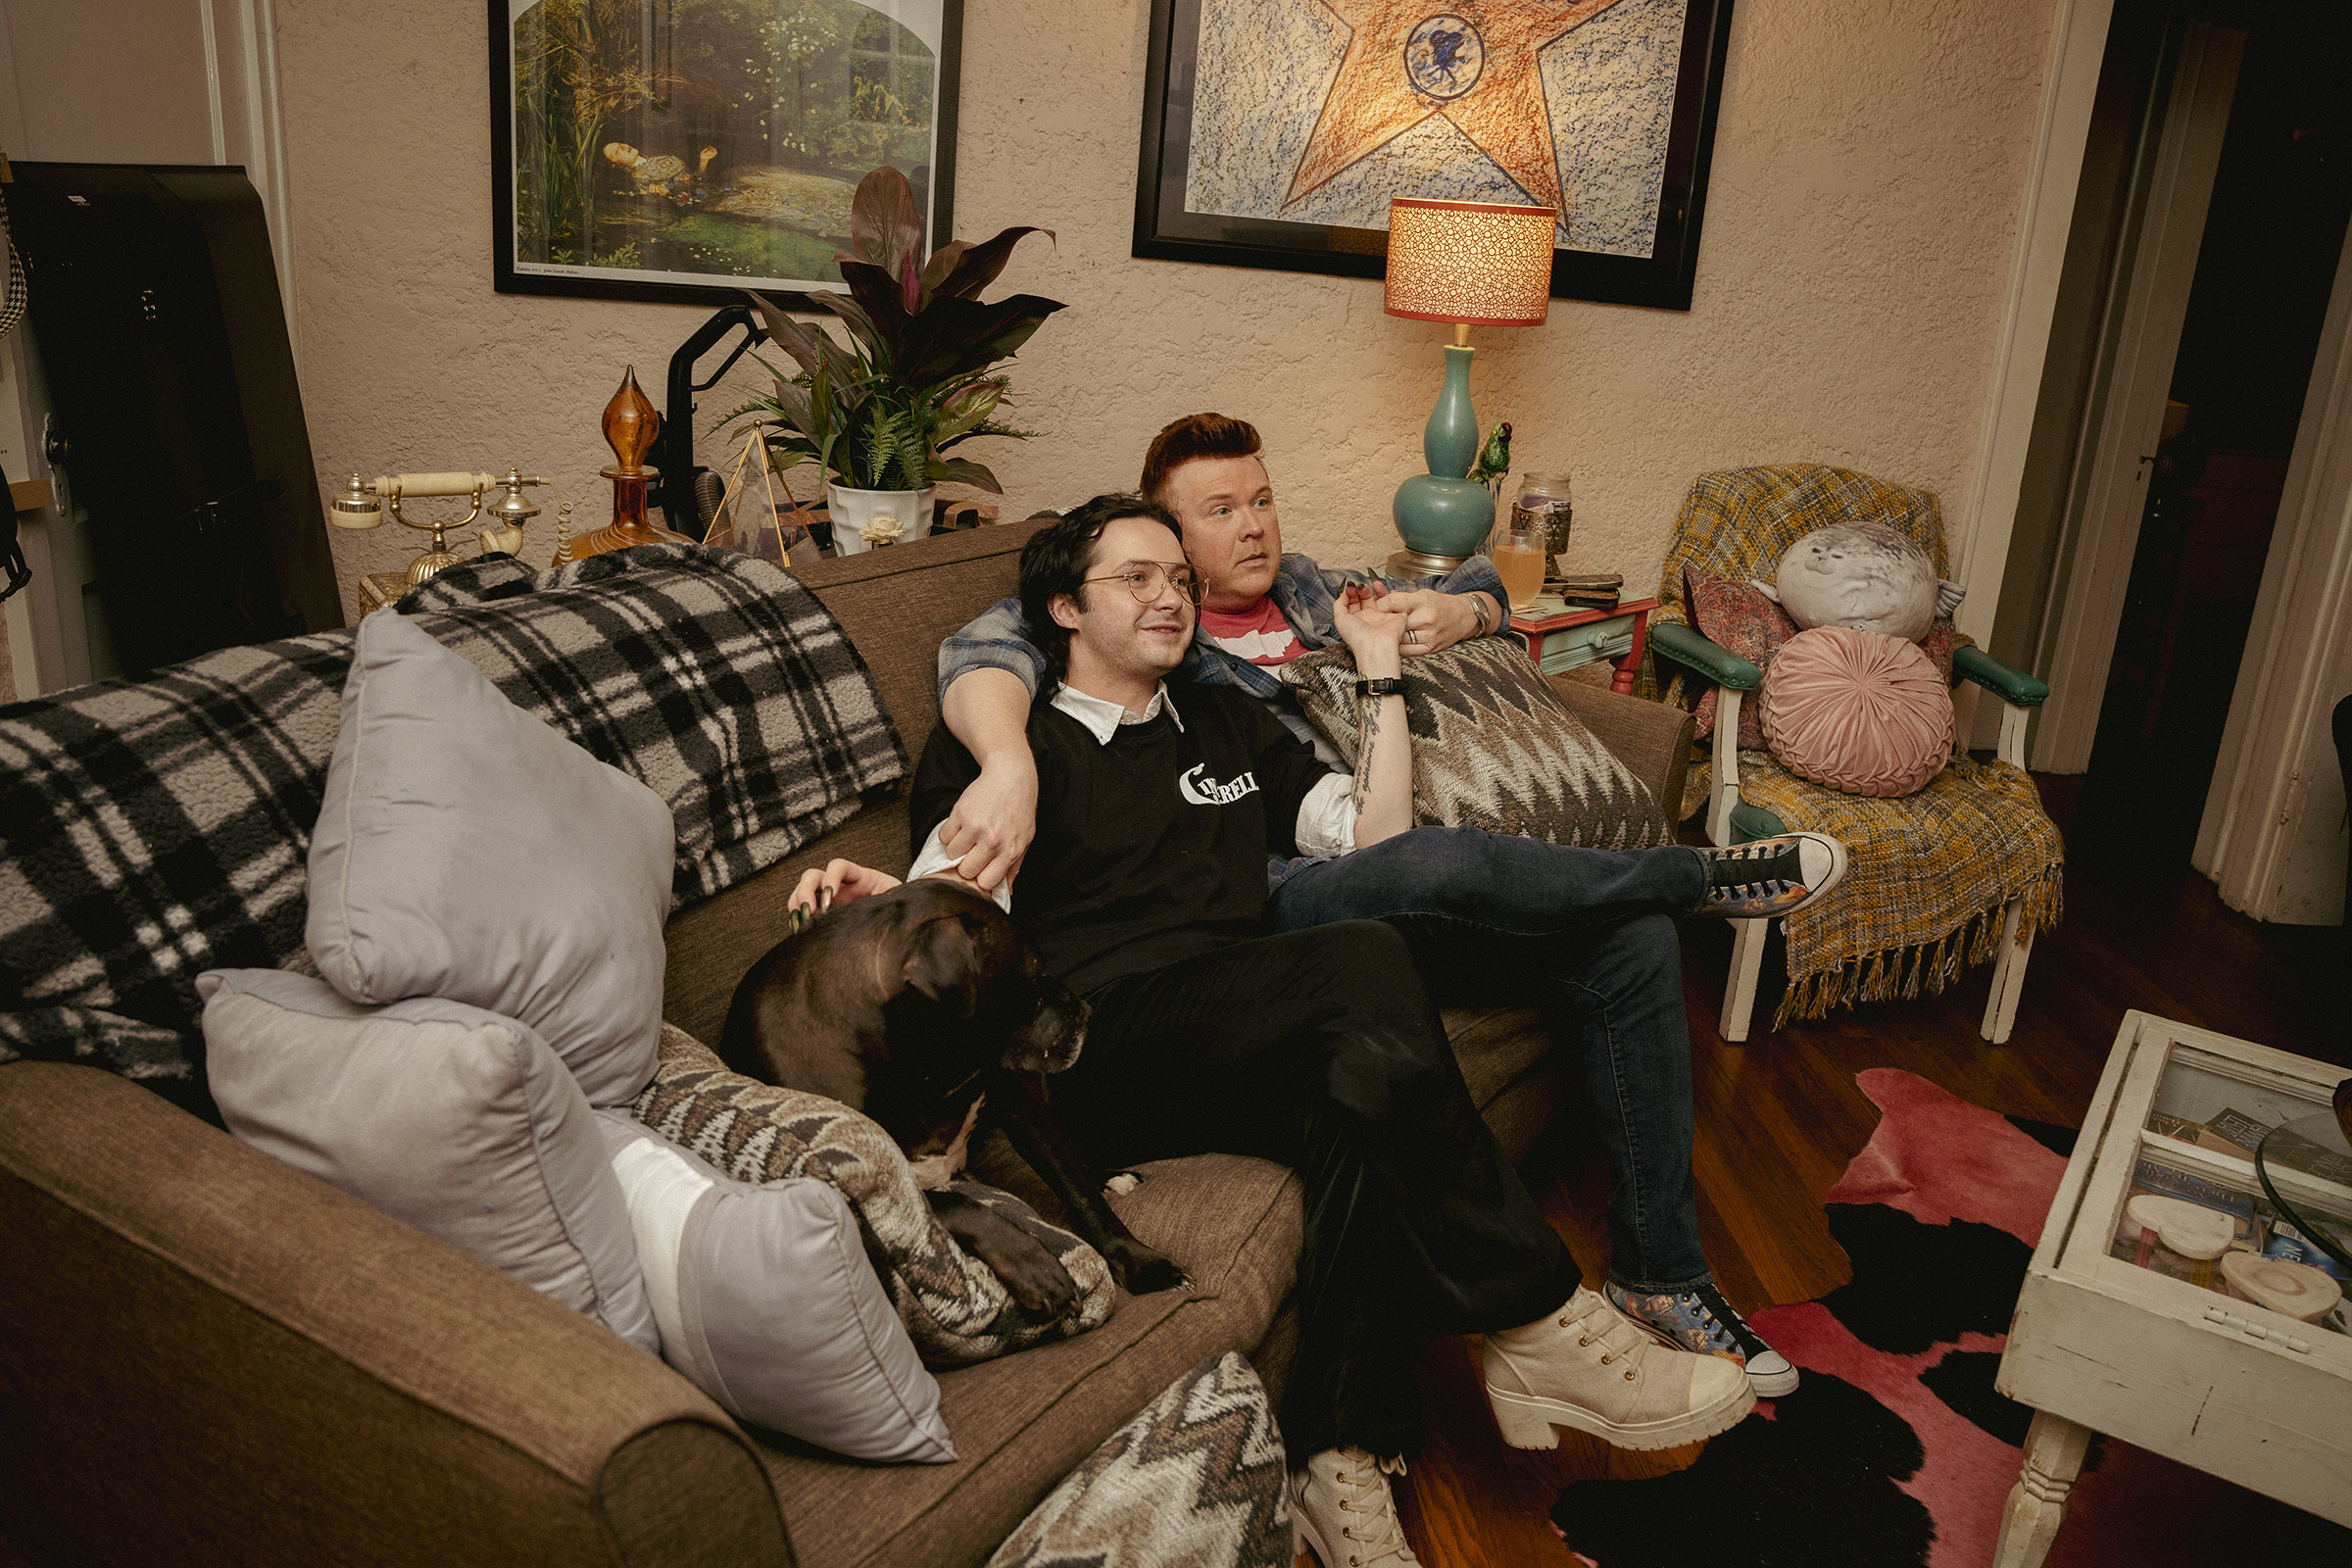 Kelly McDaniel (right) and his husband Austin Wood-McDaniel (left) hang out in their living room after working their day jobs on March 29. (Andrea Morales for TIME)